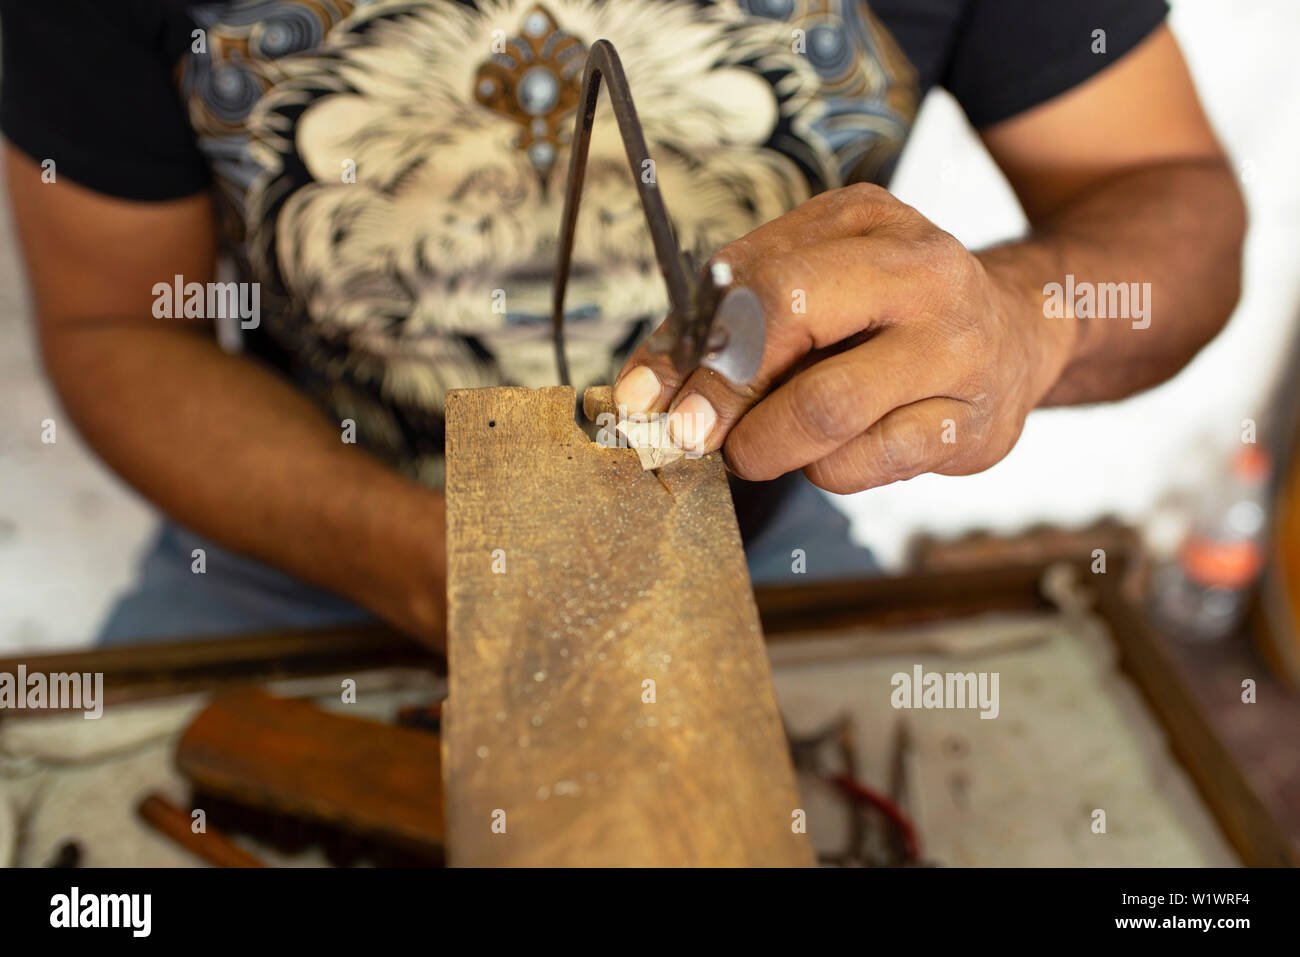 1st step of making jewellery: Mexican silversmith cutting silver plate with a saw at his jewelry workshop in Taxco, Guerrero, Mexico. Jun 2019 Stock Photo